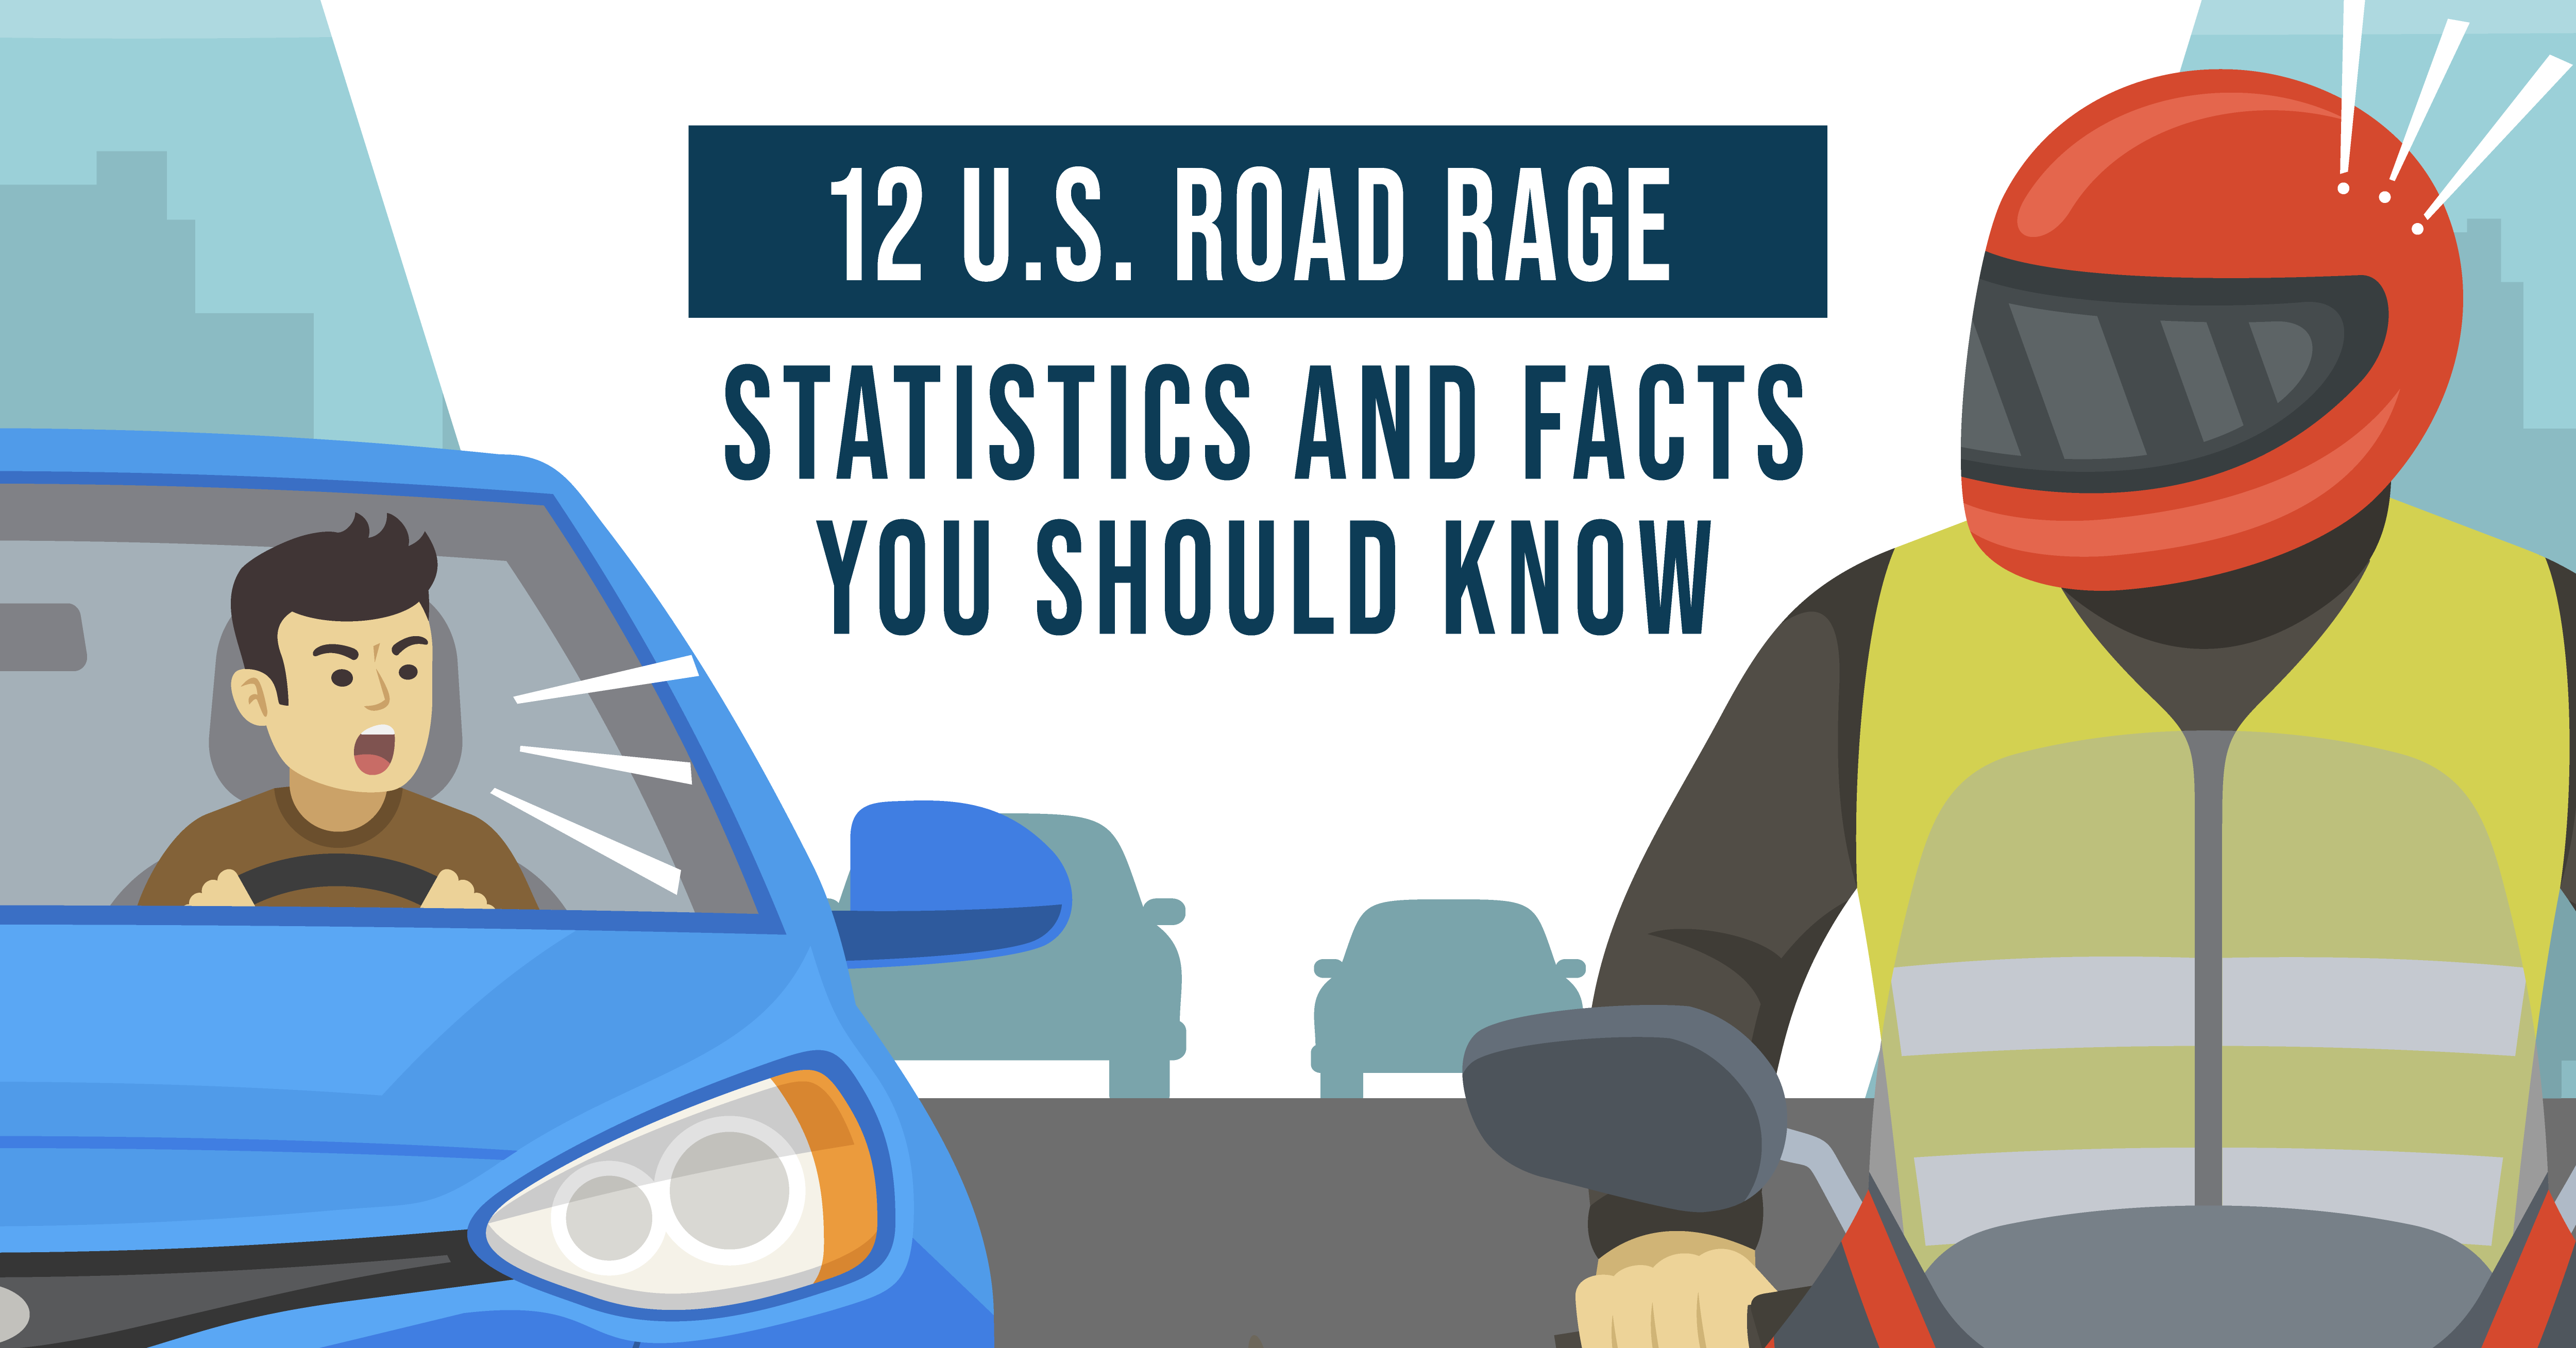 12 U.S. Road Rage Statistics and Facts You Should Know